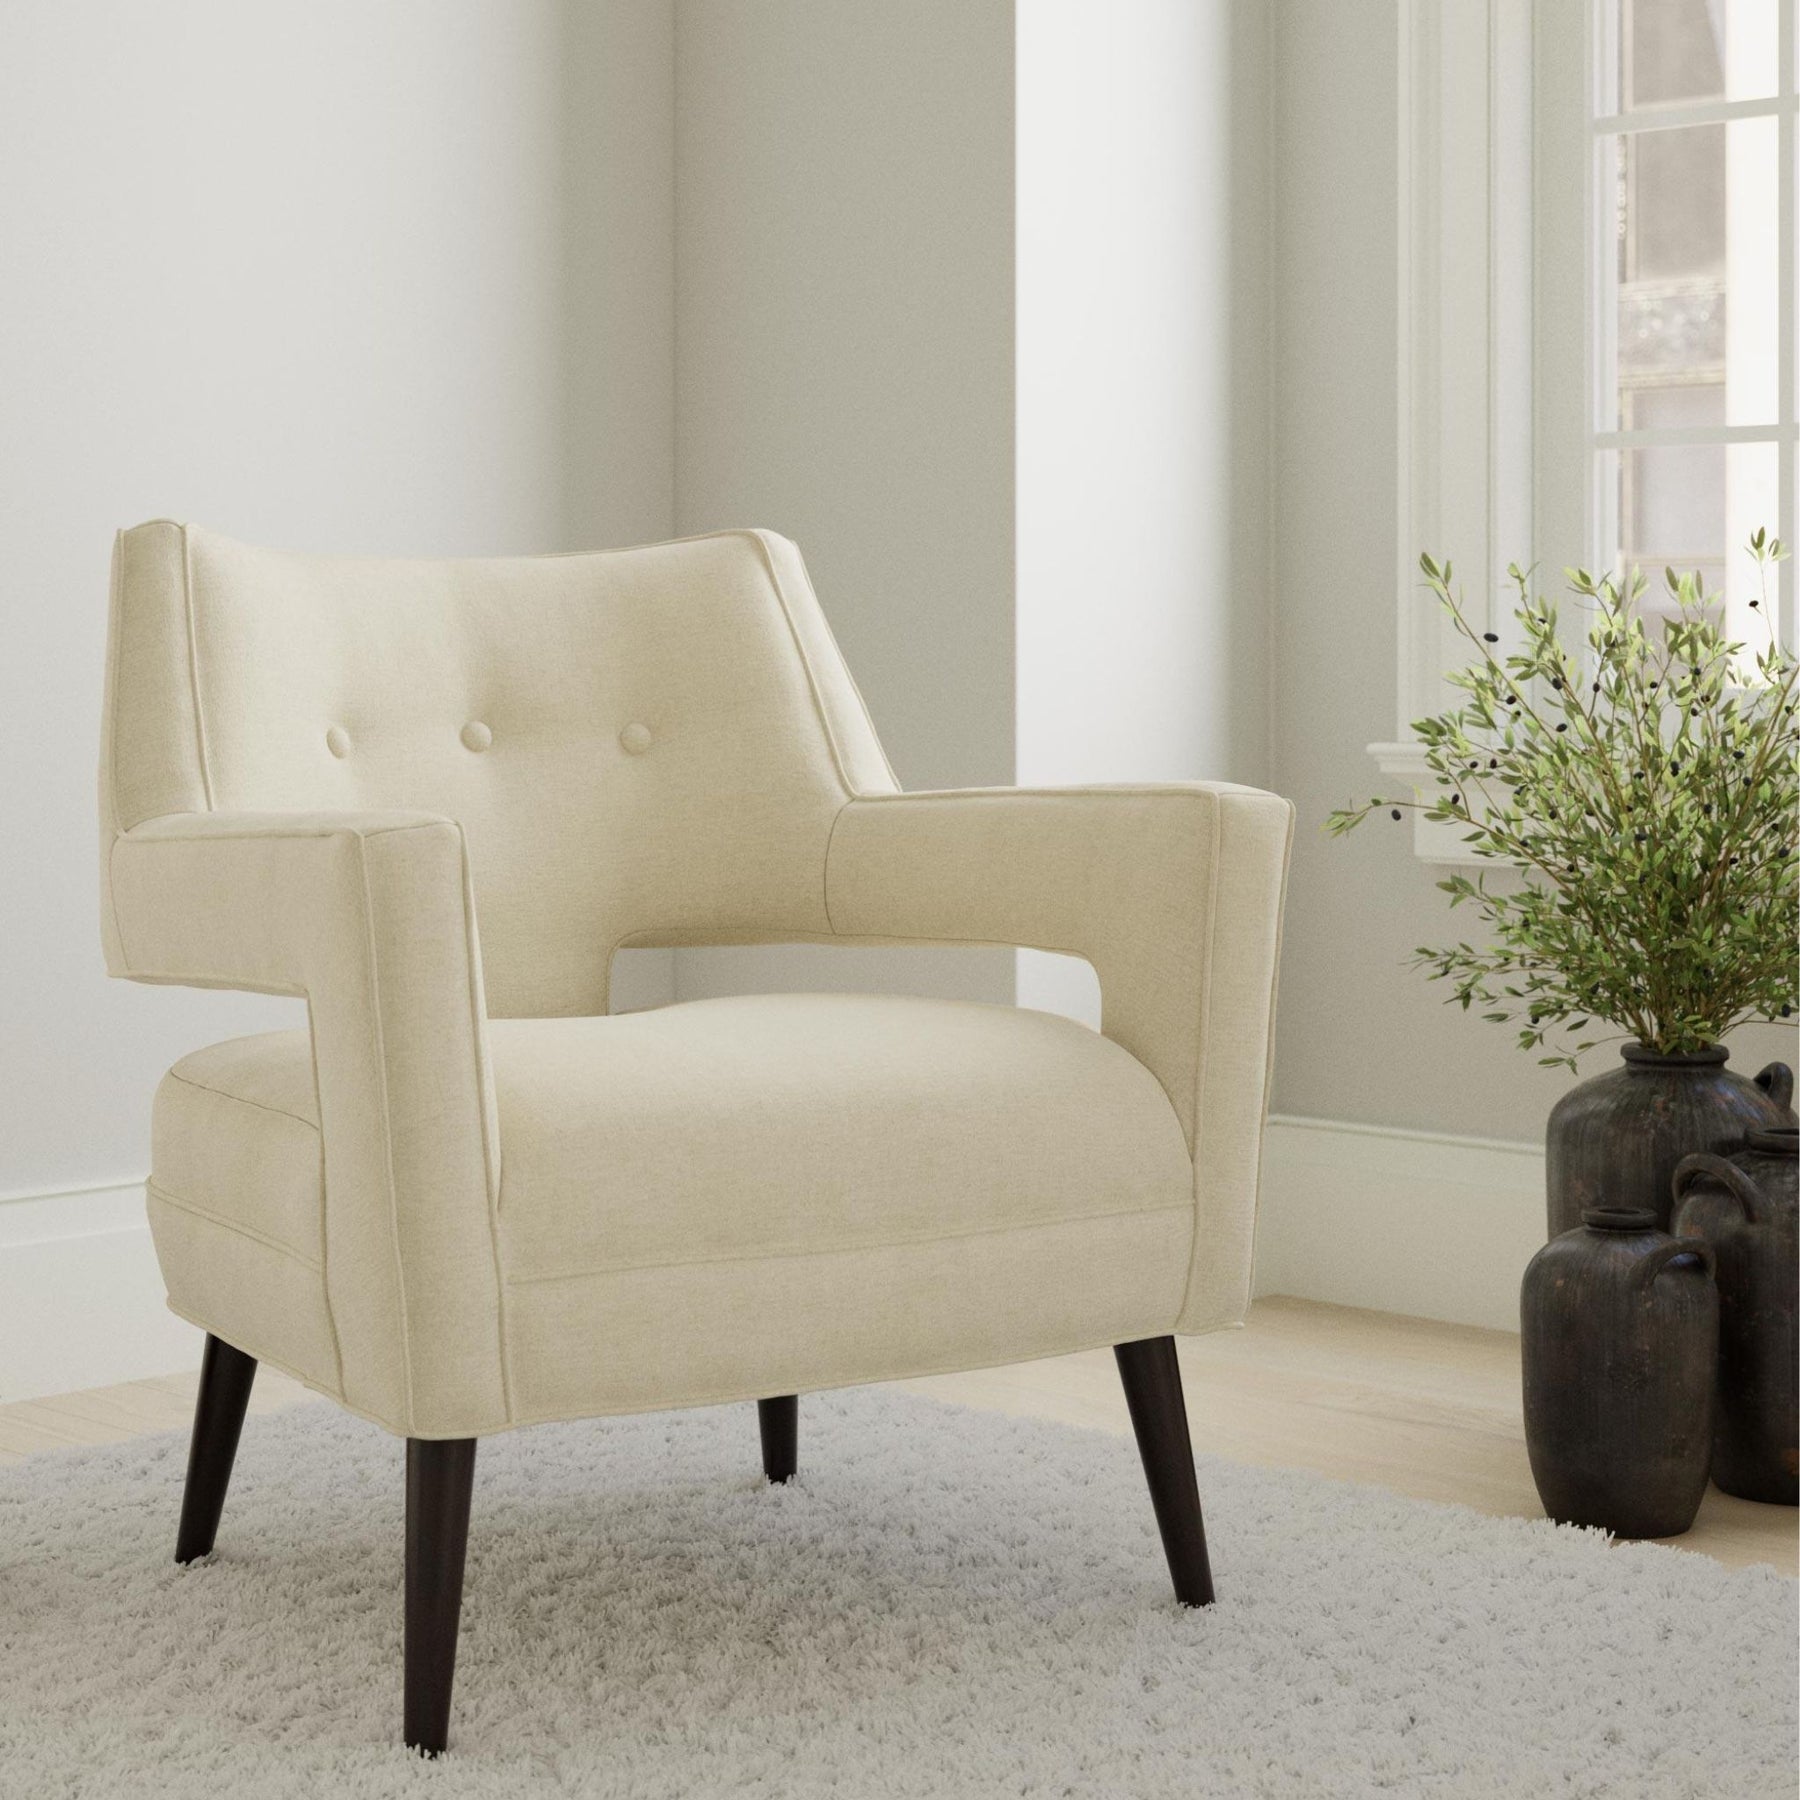 Precedent Hunter Chair in Room with Plant